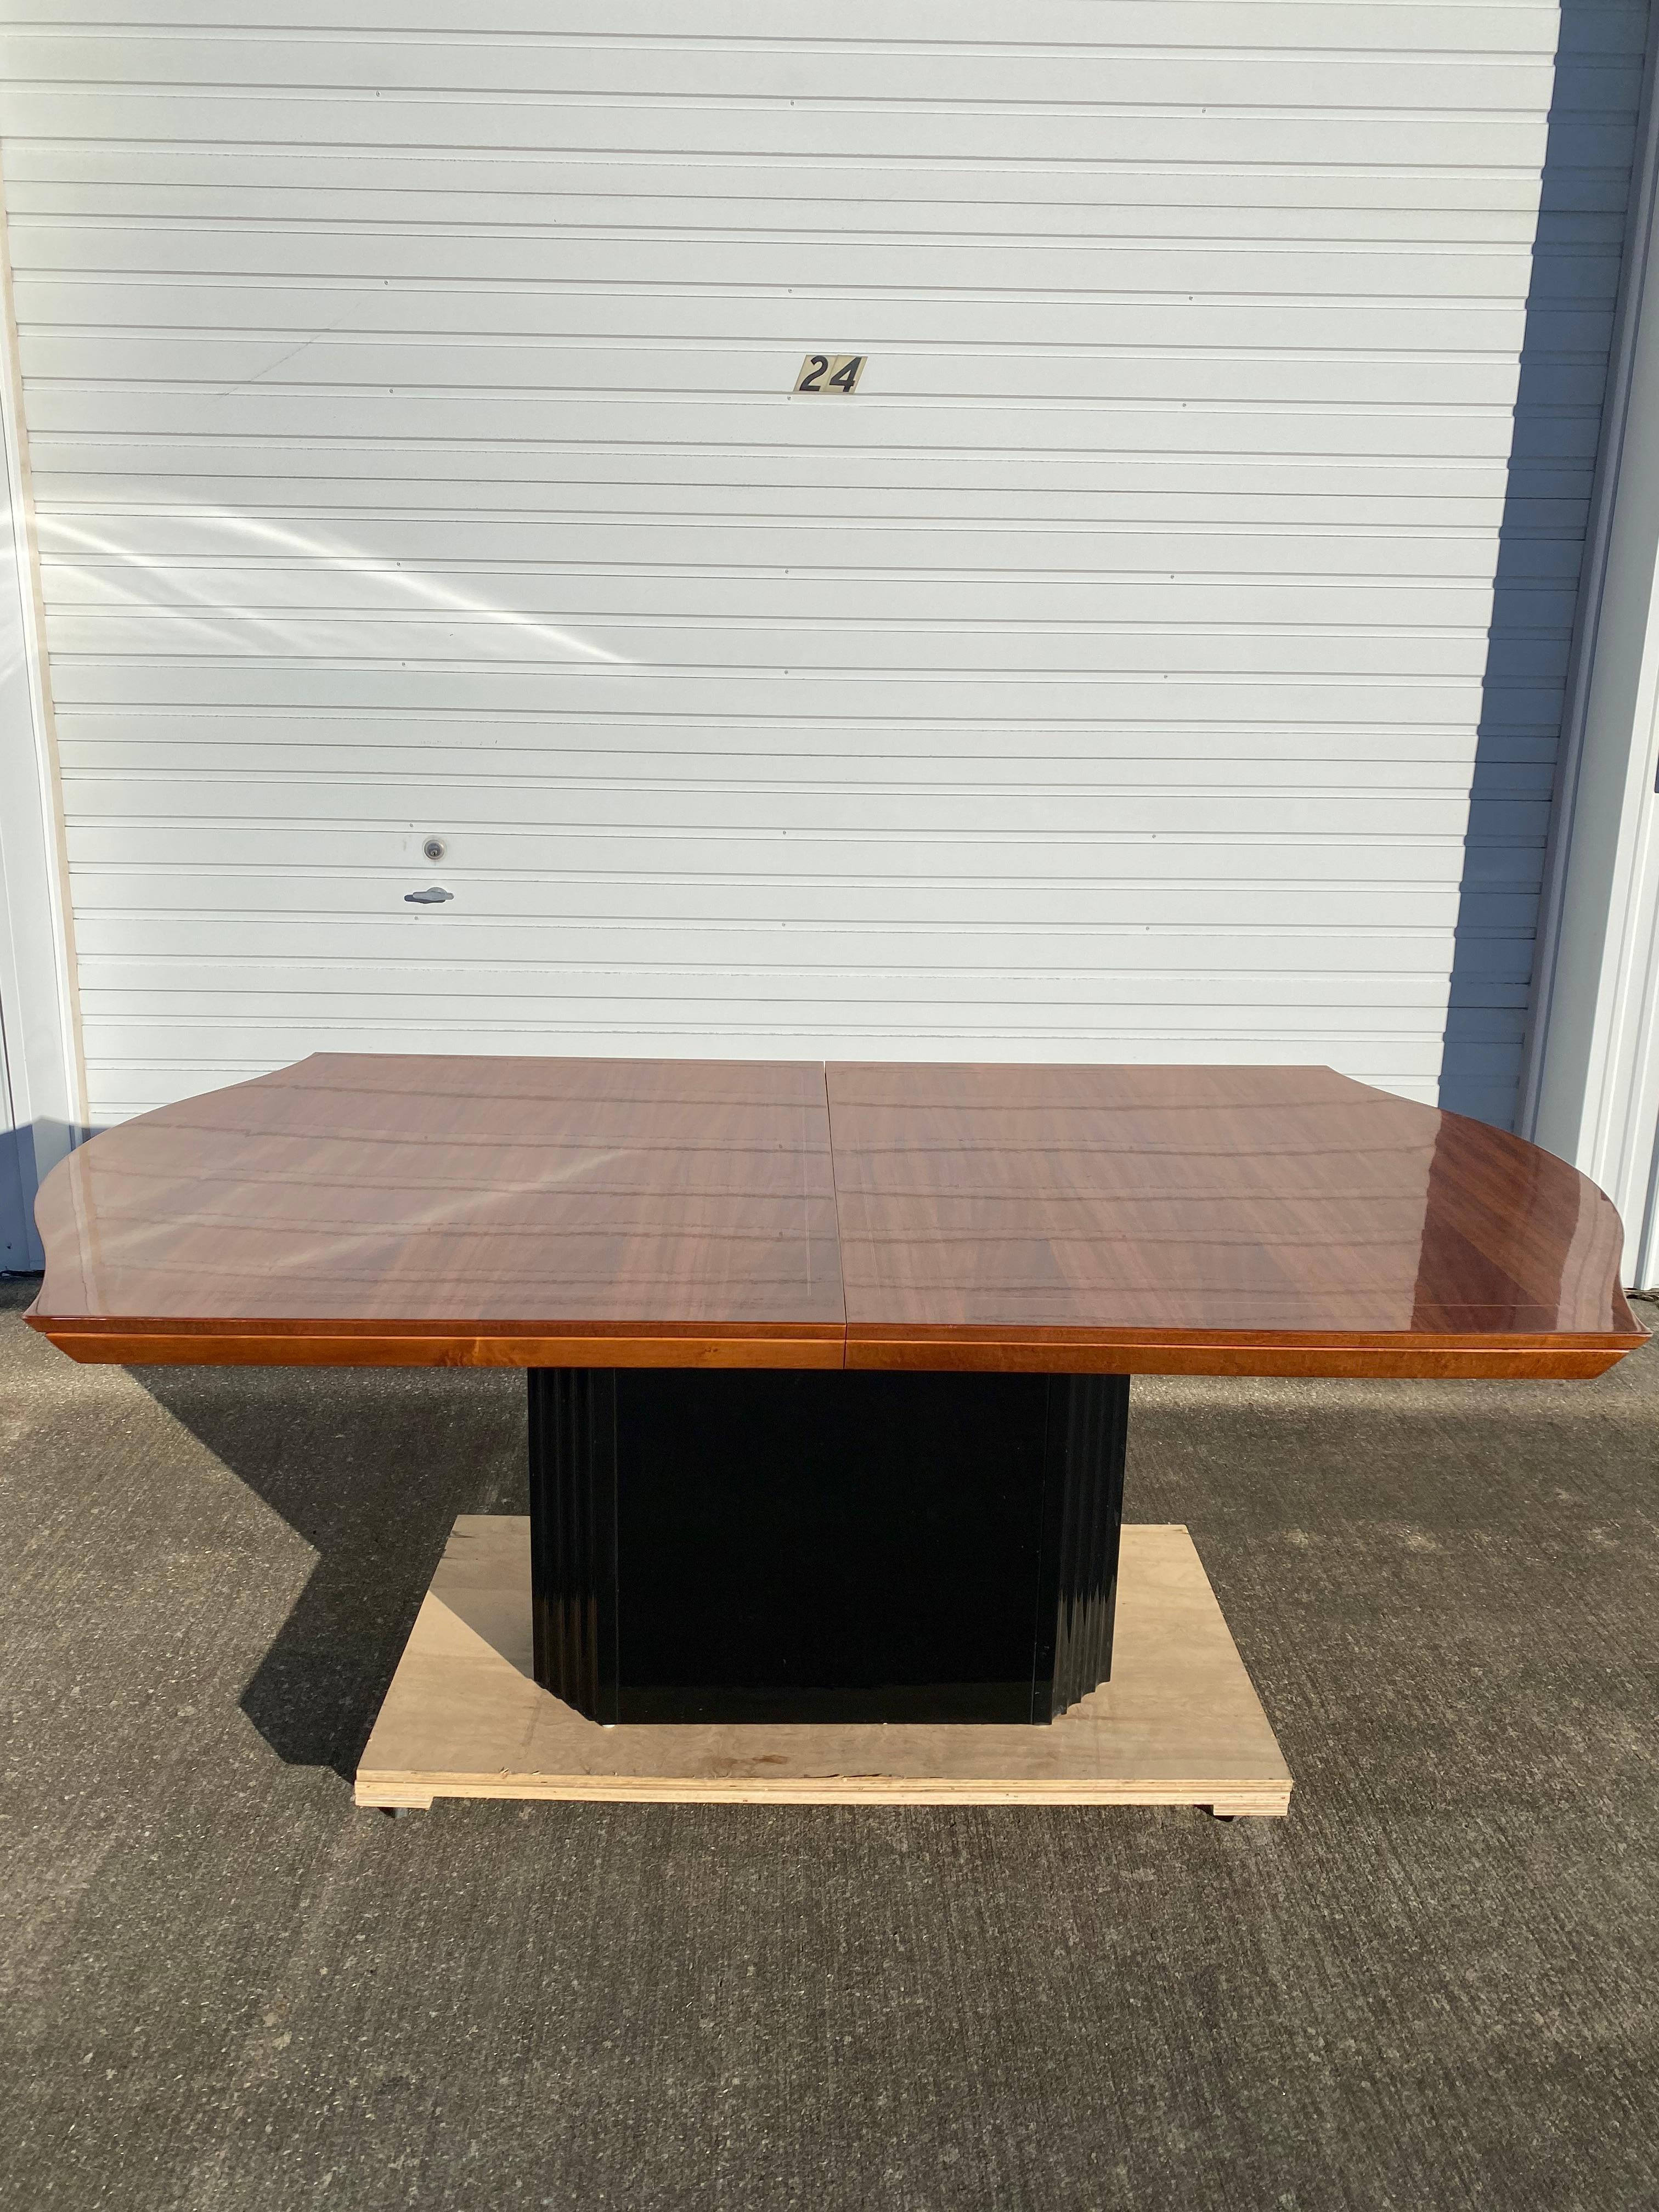 1990's Henredon Art Deco Style Dining Table. There a few scratches on the top due to age but overall in great condition and a great addition to an art deco lover! Matching chairs available.

Measurements:

80ʺW × 44ʺD × 29.25ʺH

101